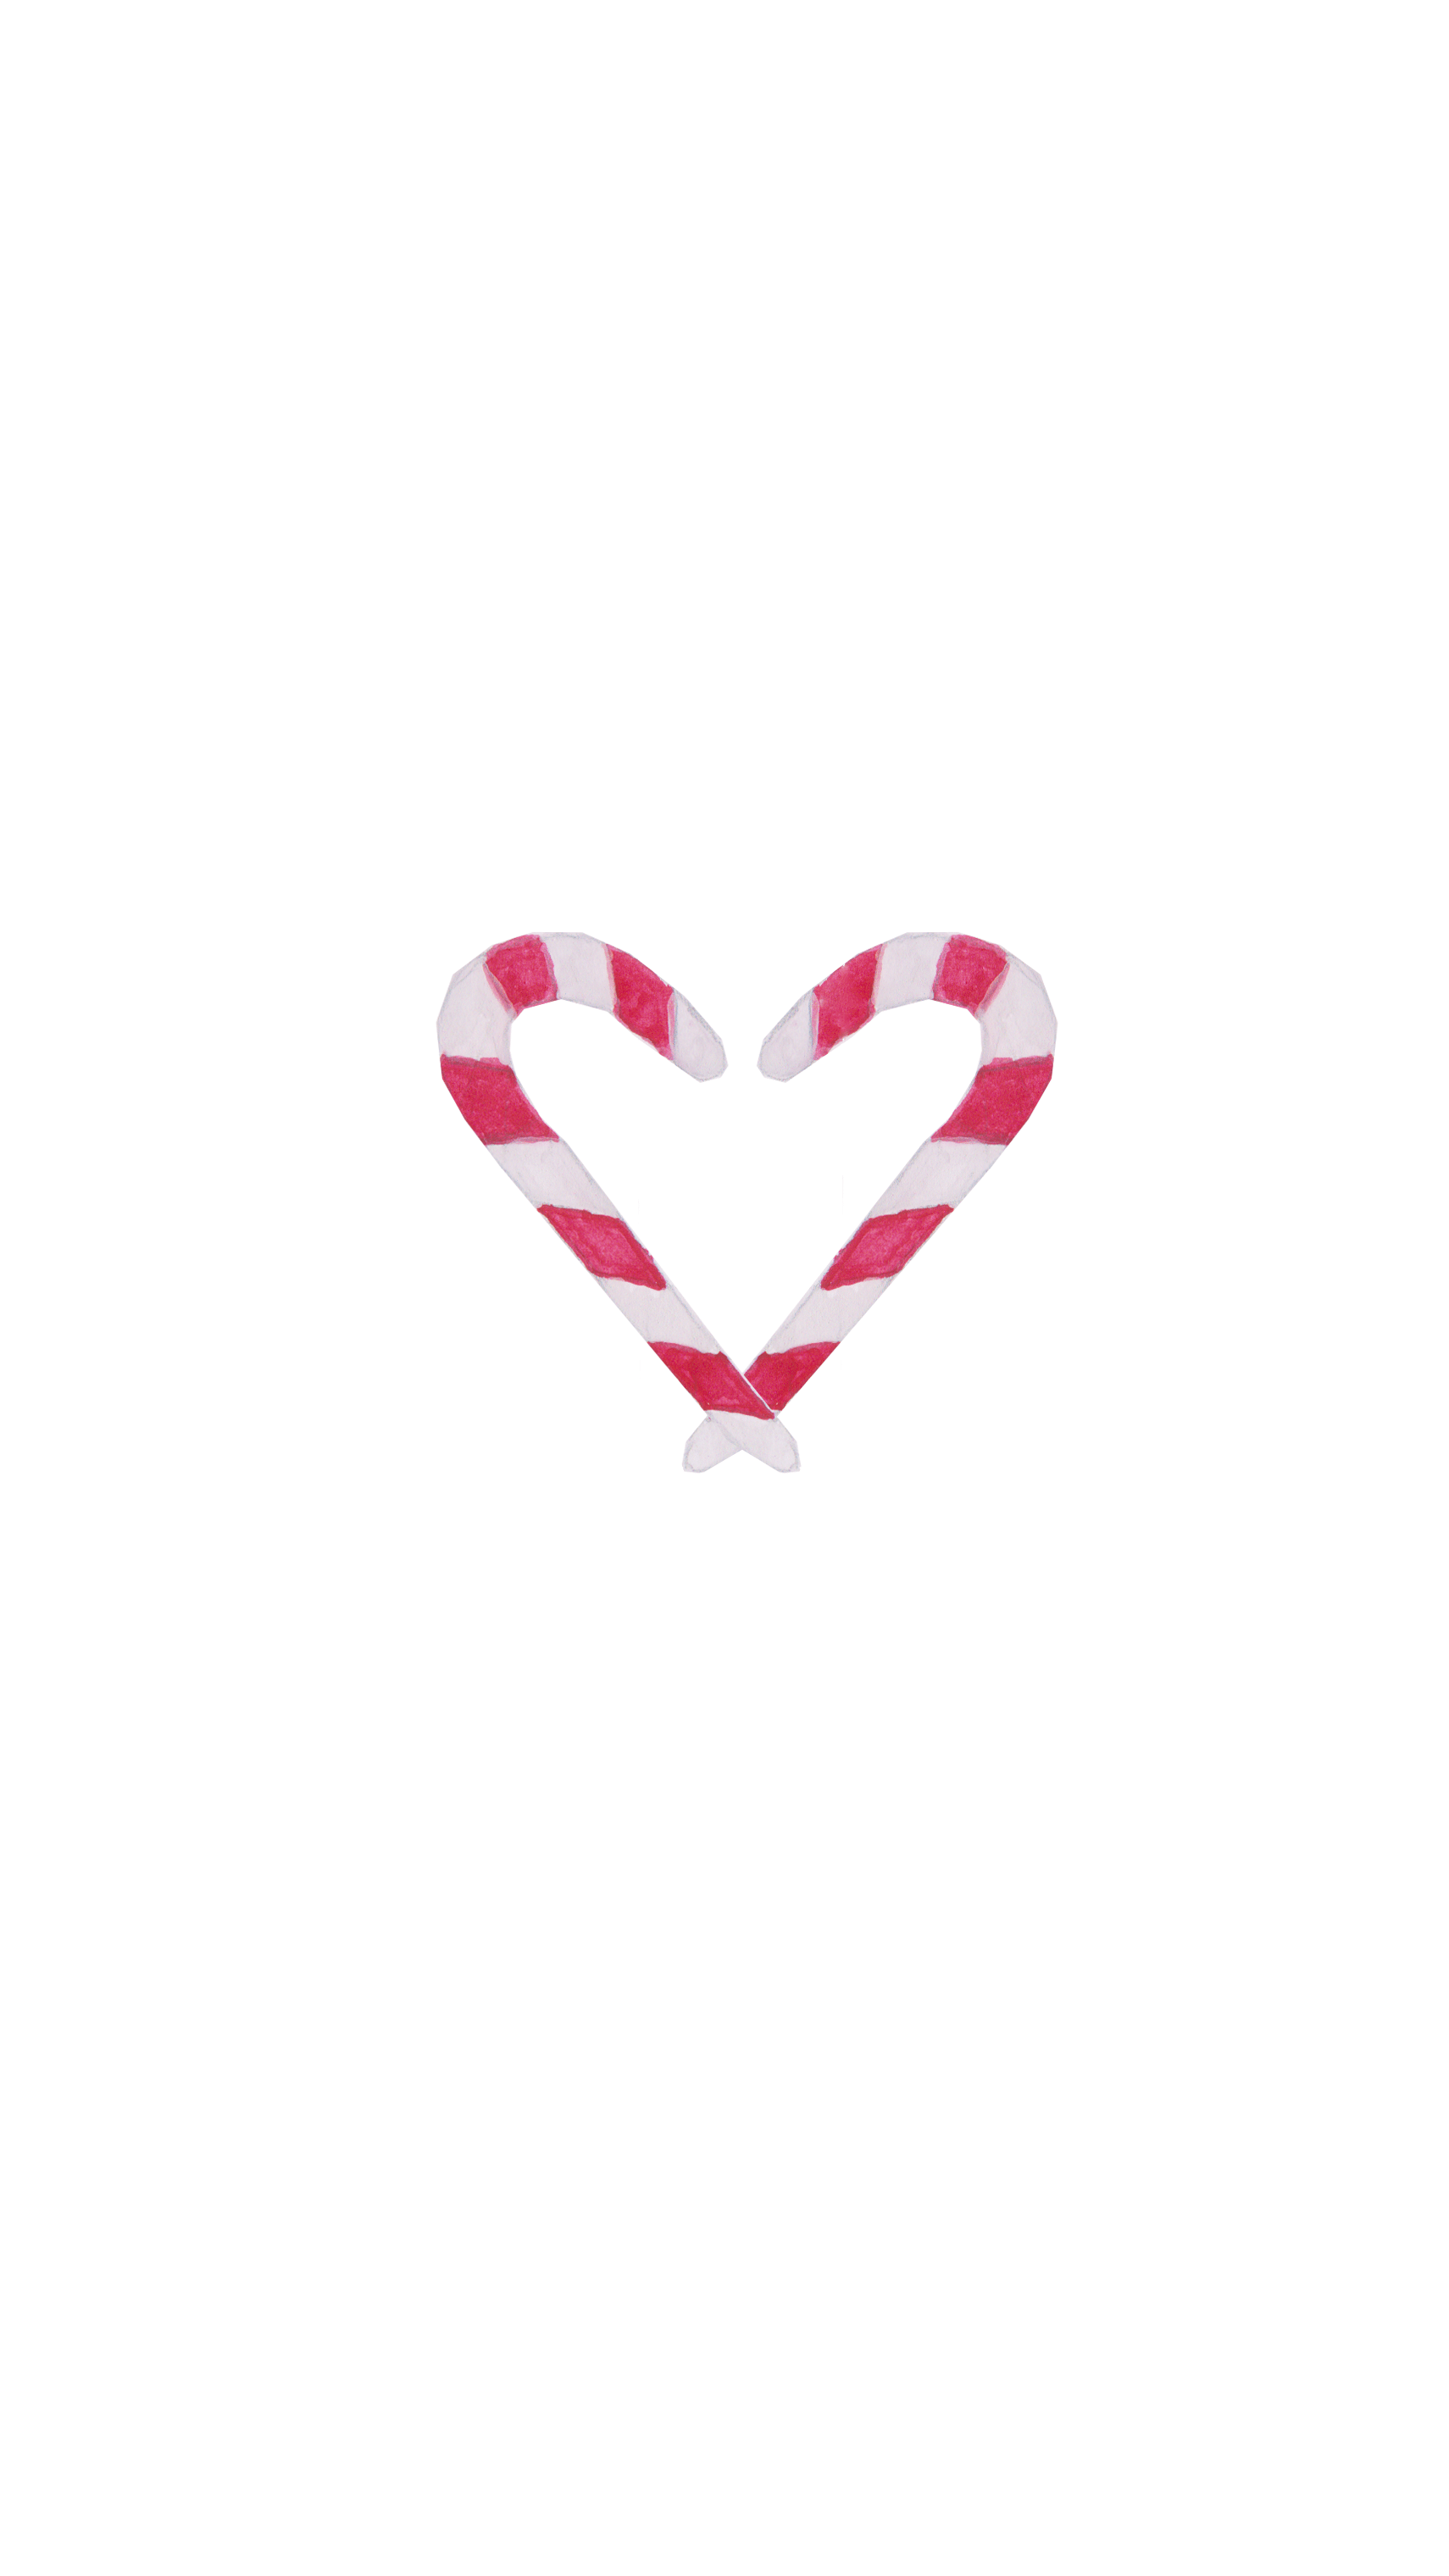 Candy Cane Christmas Heart Watercolor Phone Wallpaper. Candy cane, Phone wallpaper, Christmas wallpaper